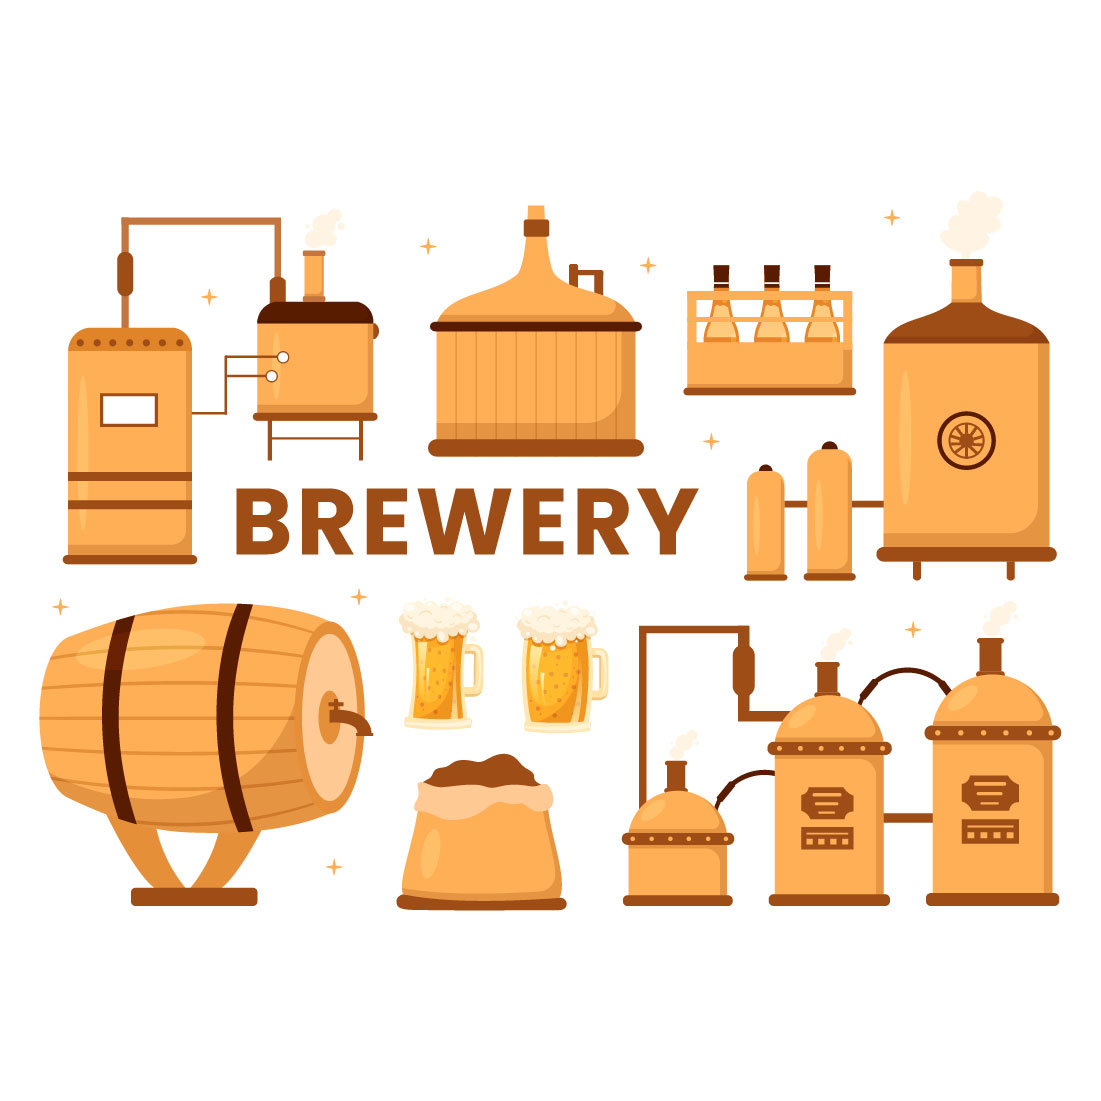 Brewery Design Graphics cover image.